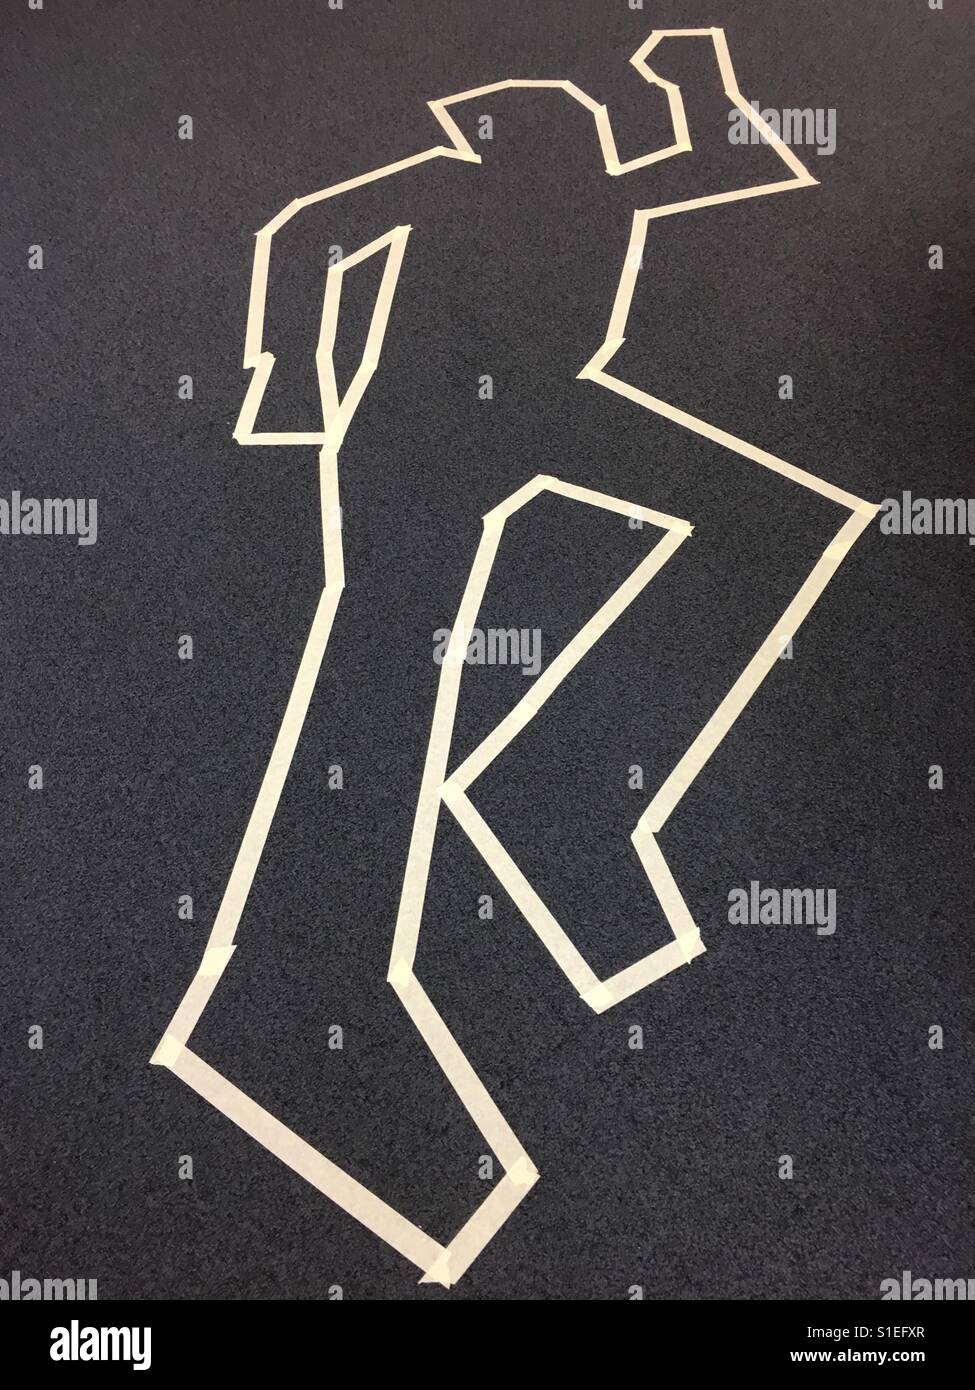 Masking tape outline of the human form on a carpeted floor. Stock Photo